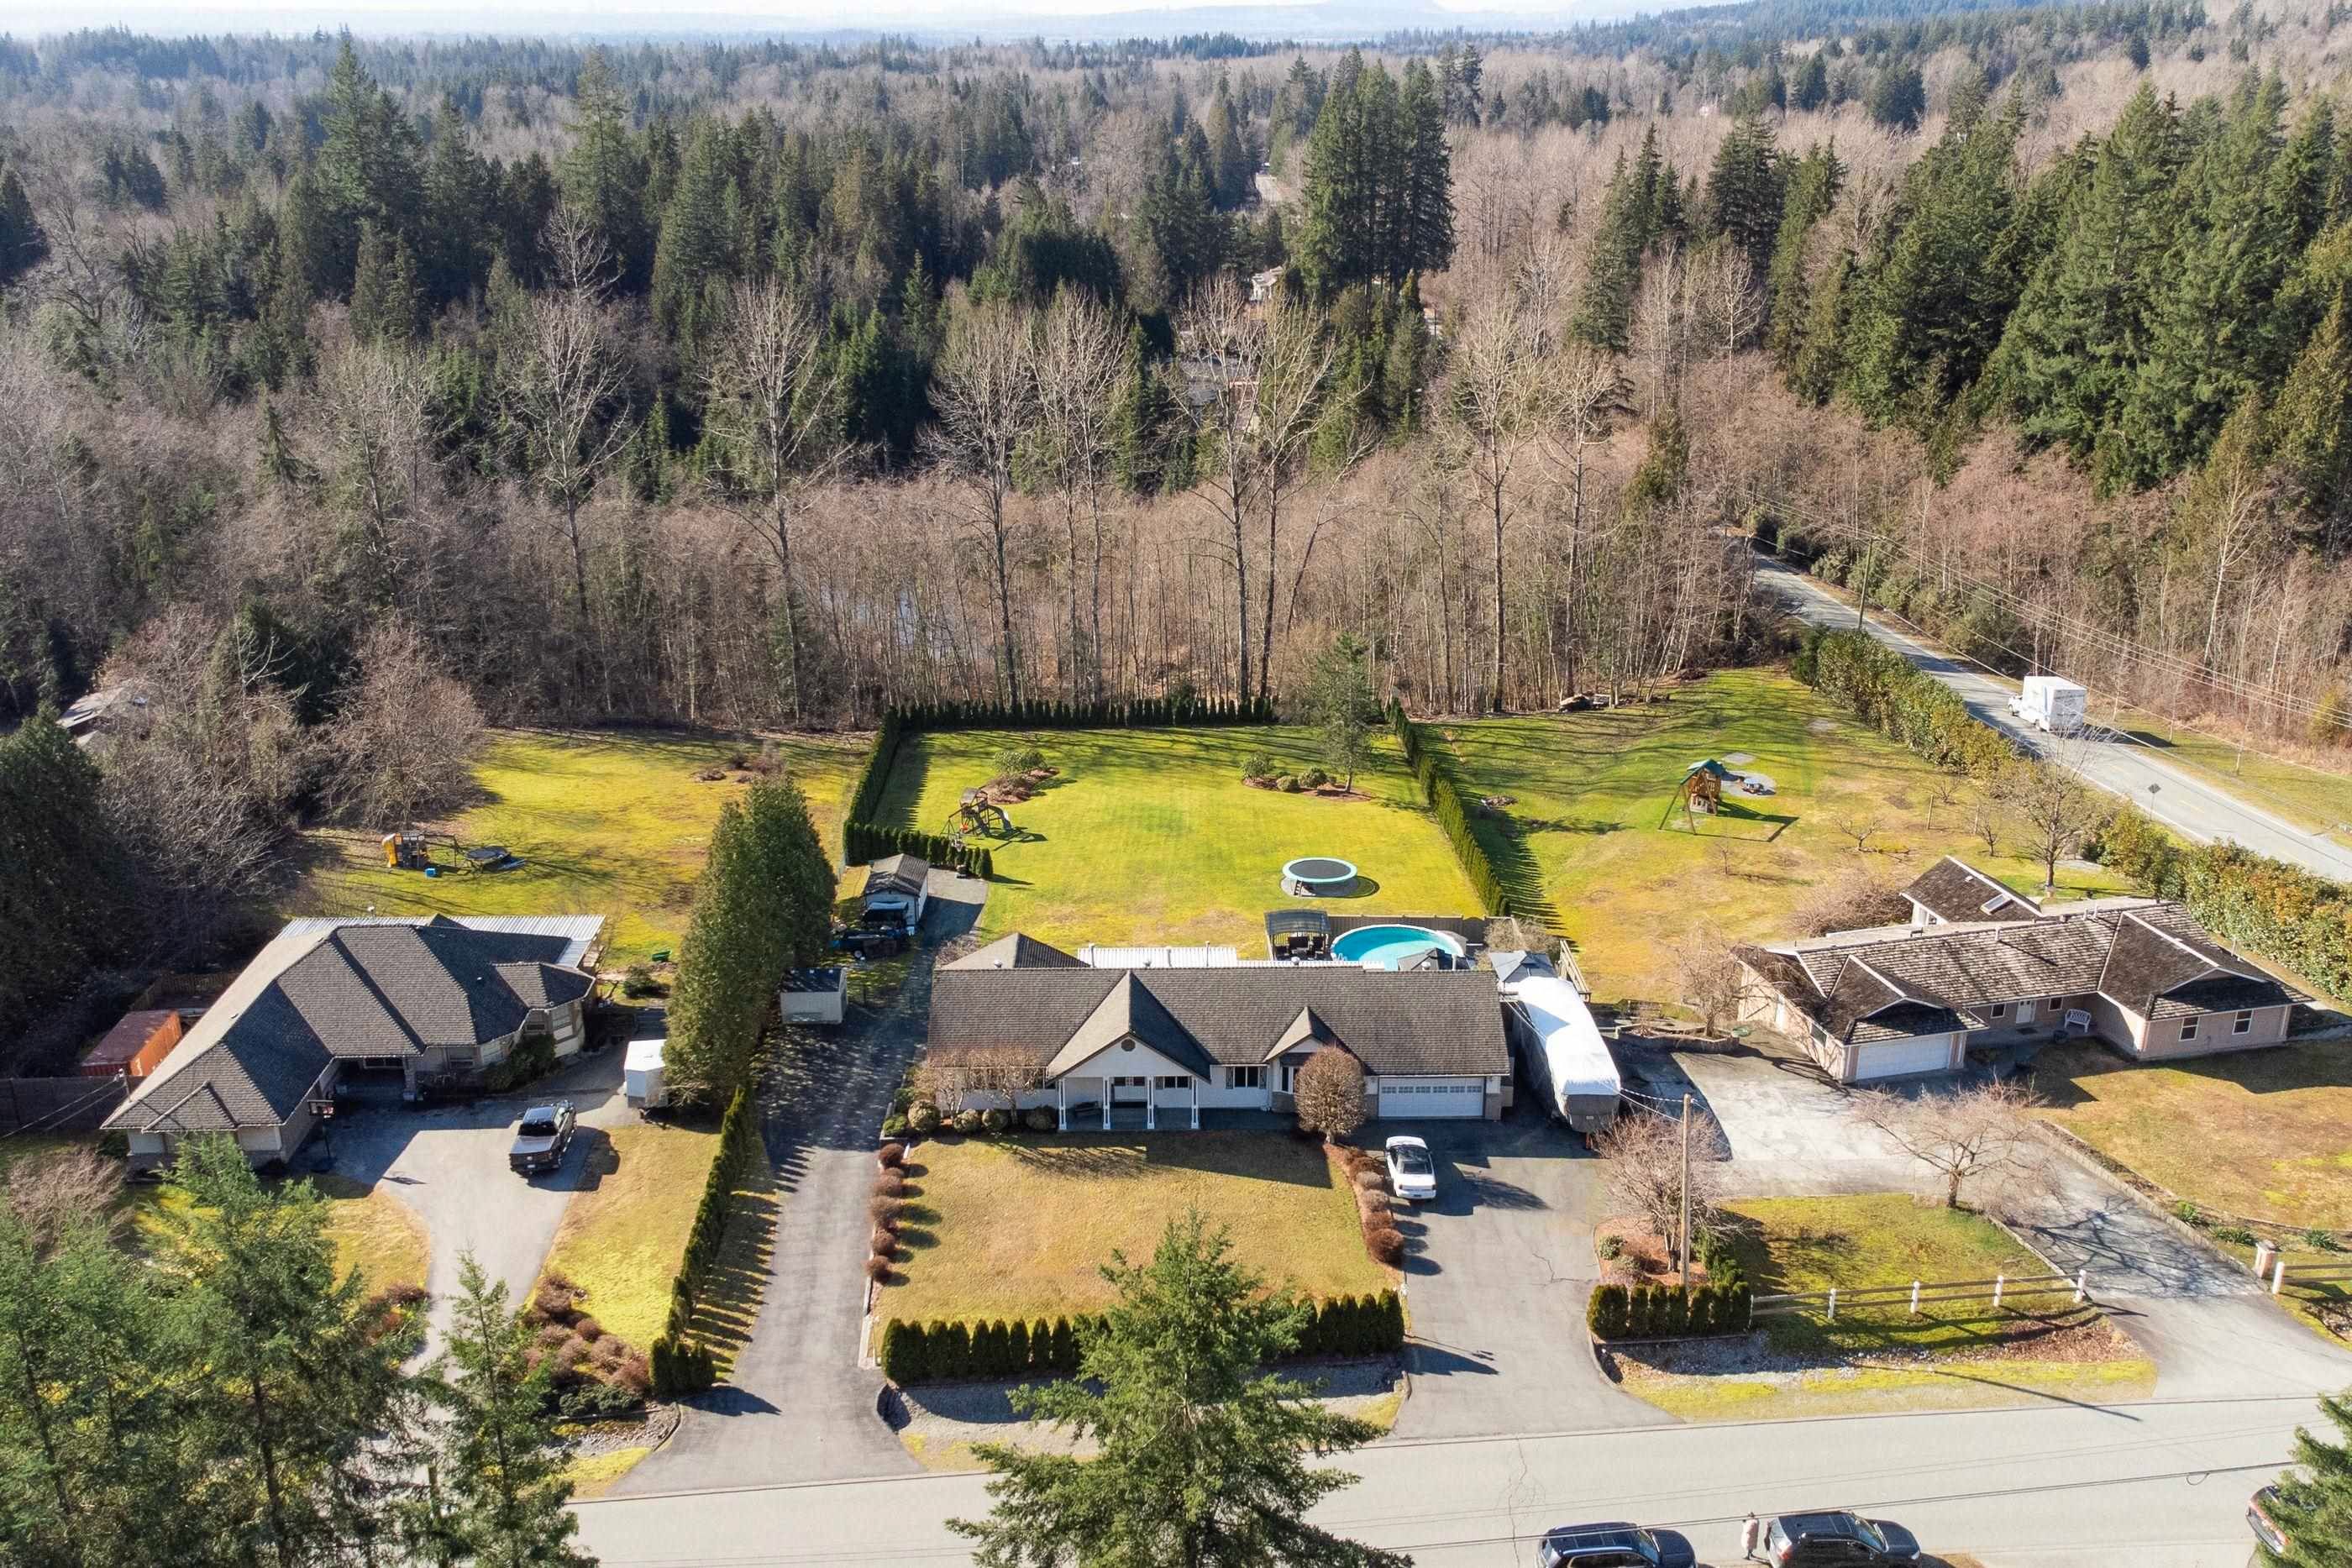 New property listed in Websters Corners, Maple Ridge